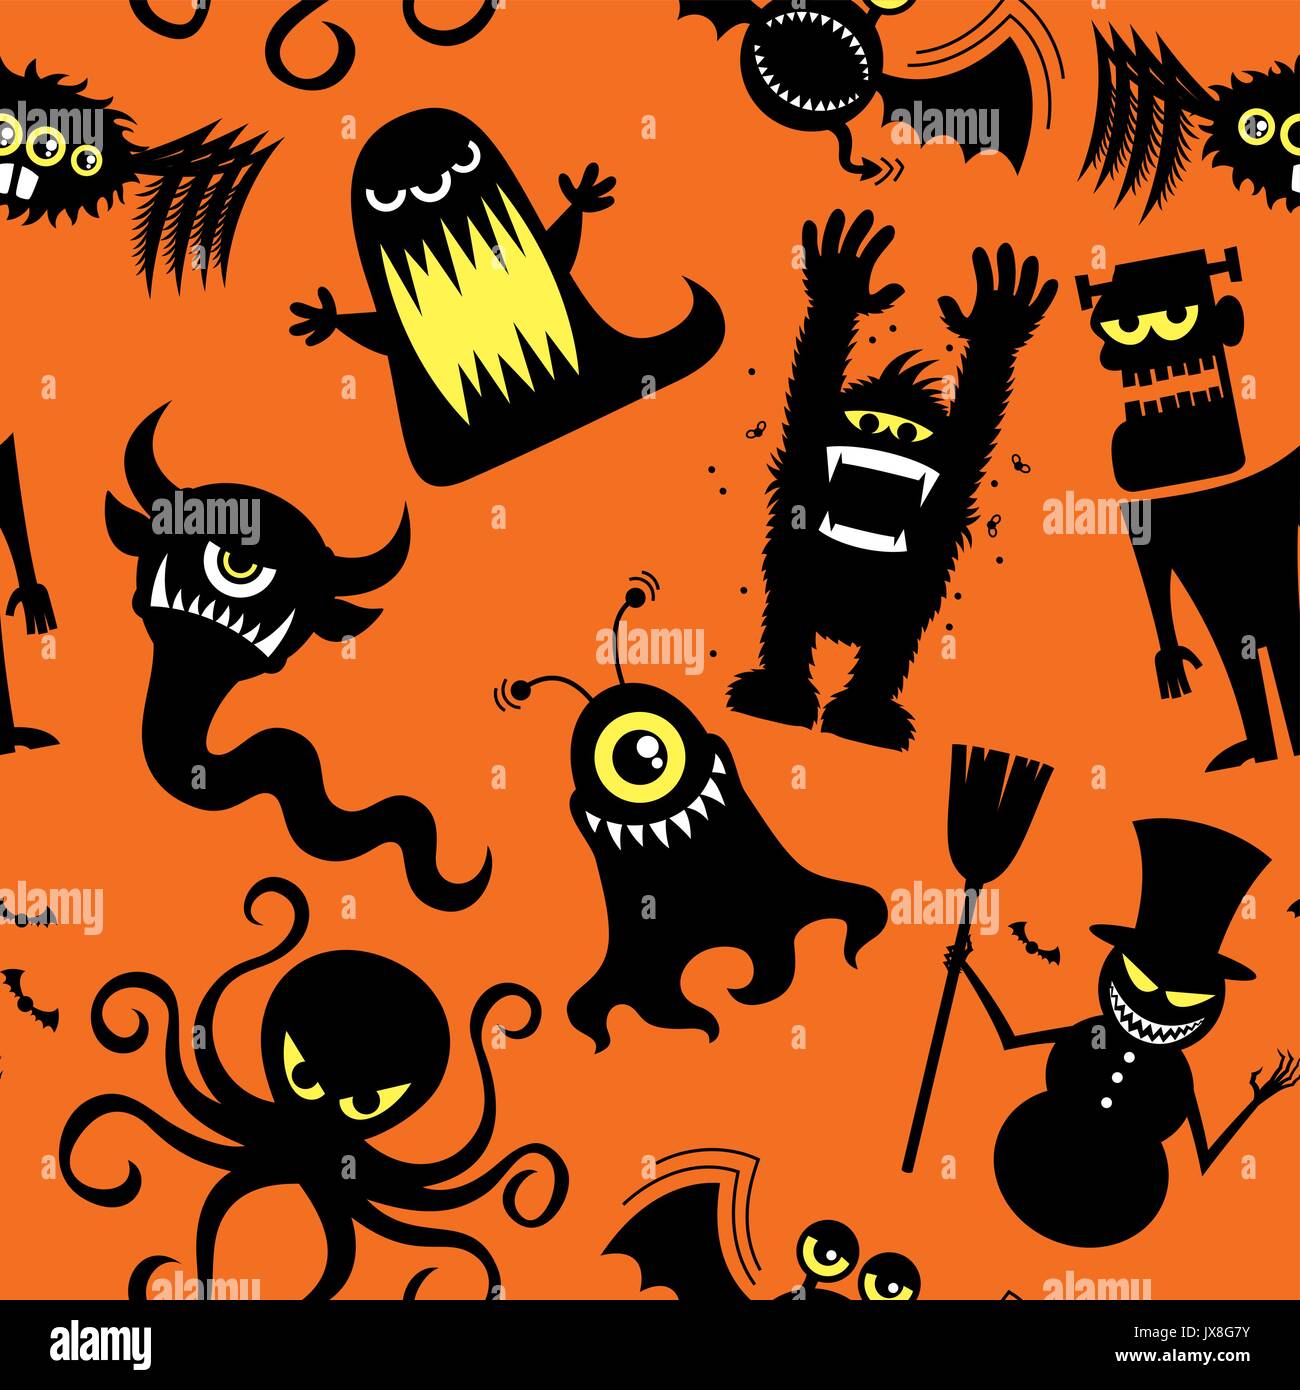 Seamless pattern with silhouettes of cartoon monsters Stock Vector ...